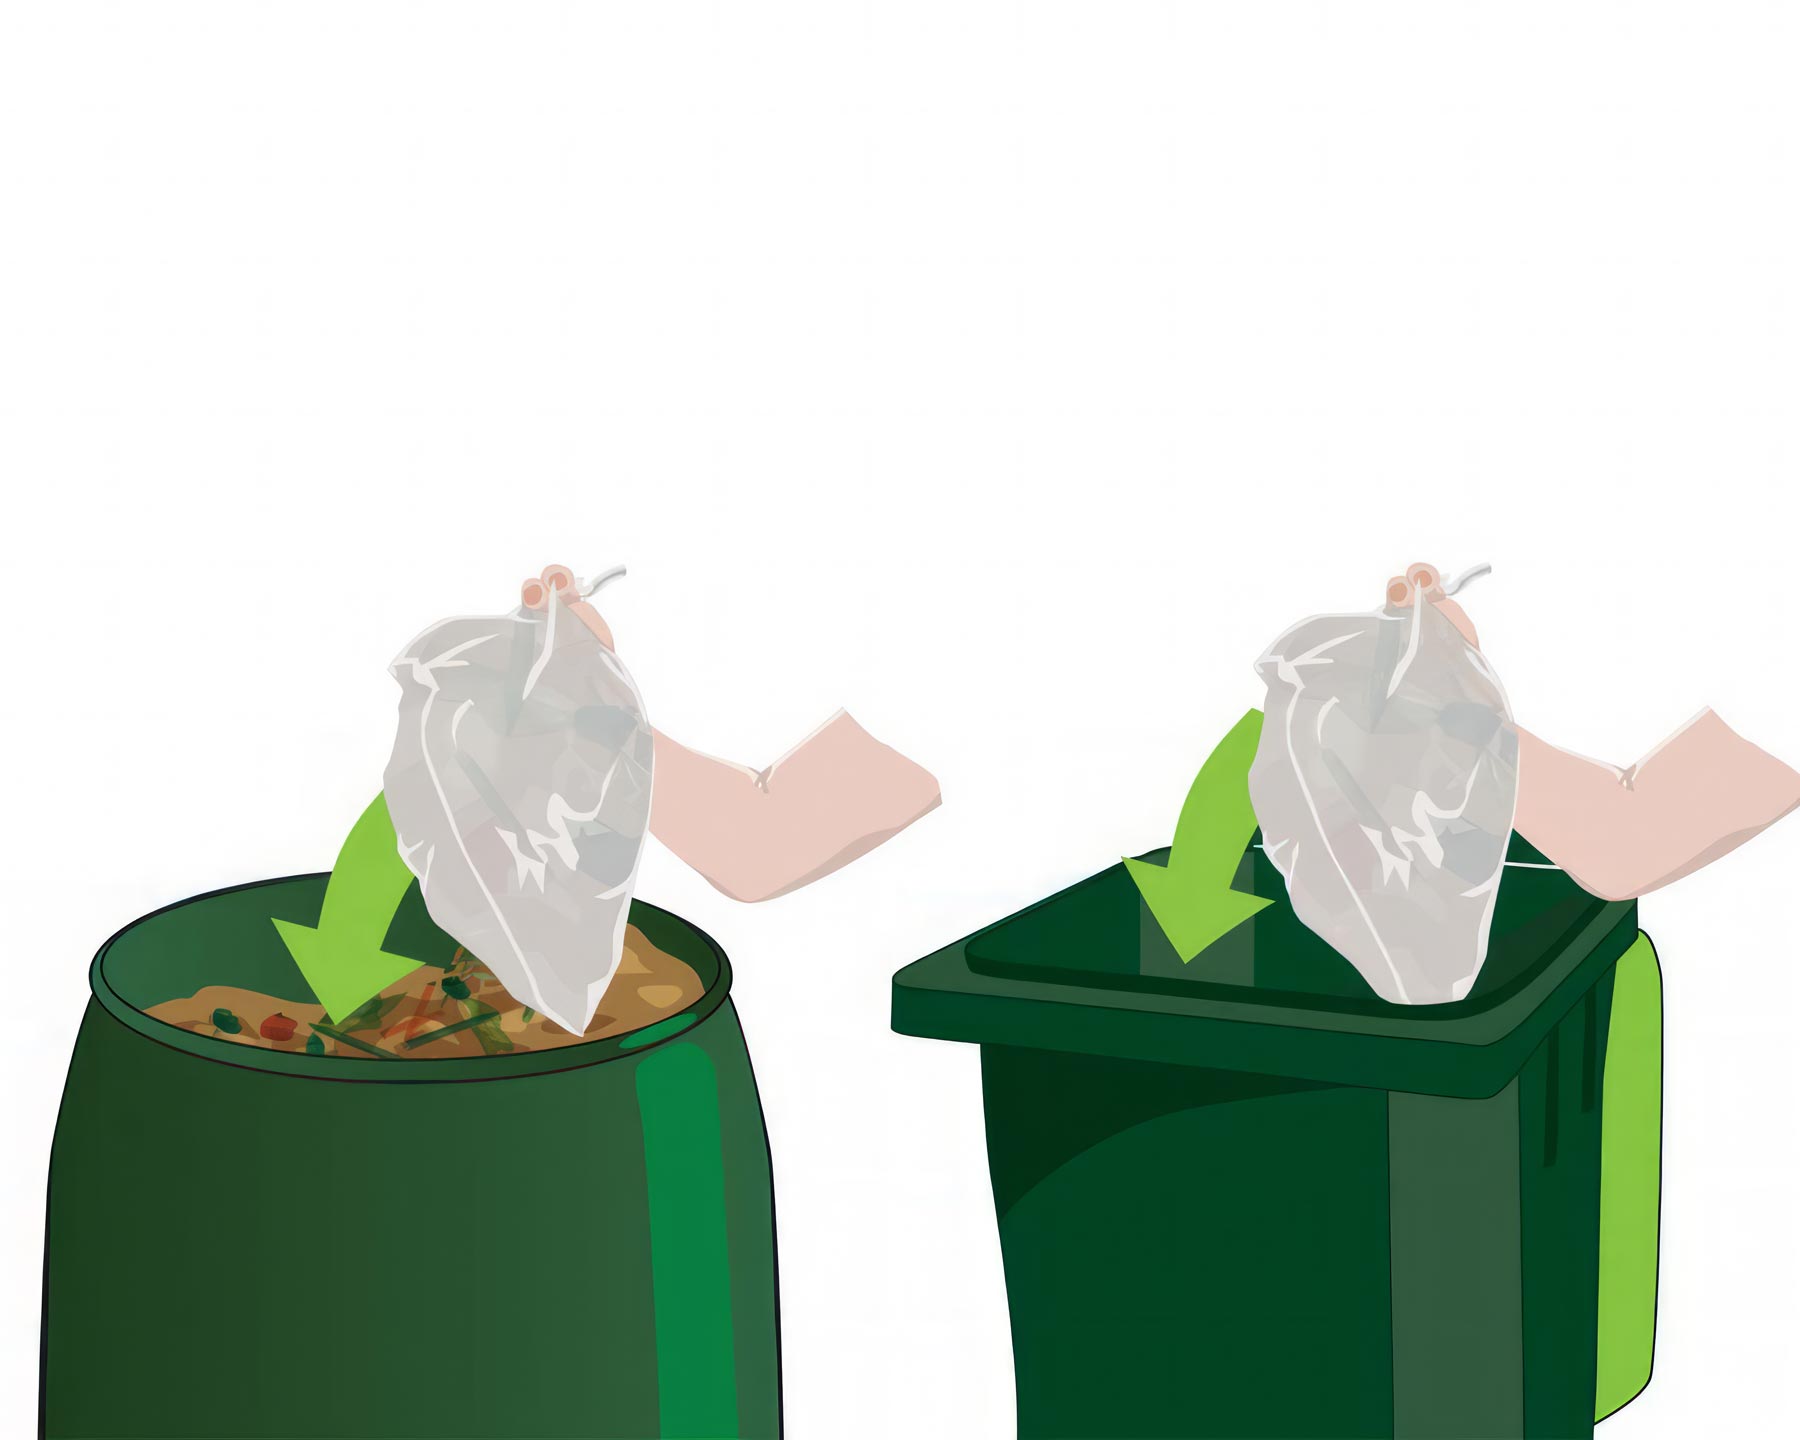 5L Compostable Bag - How To Dispose